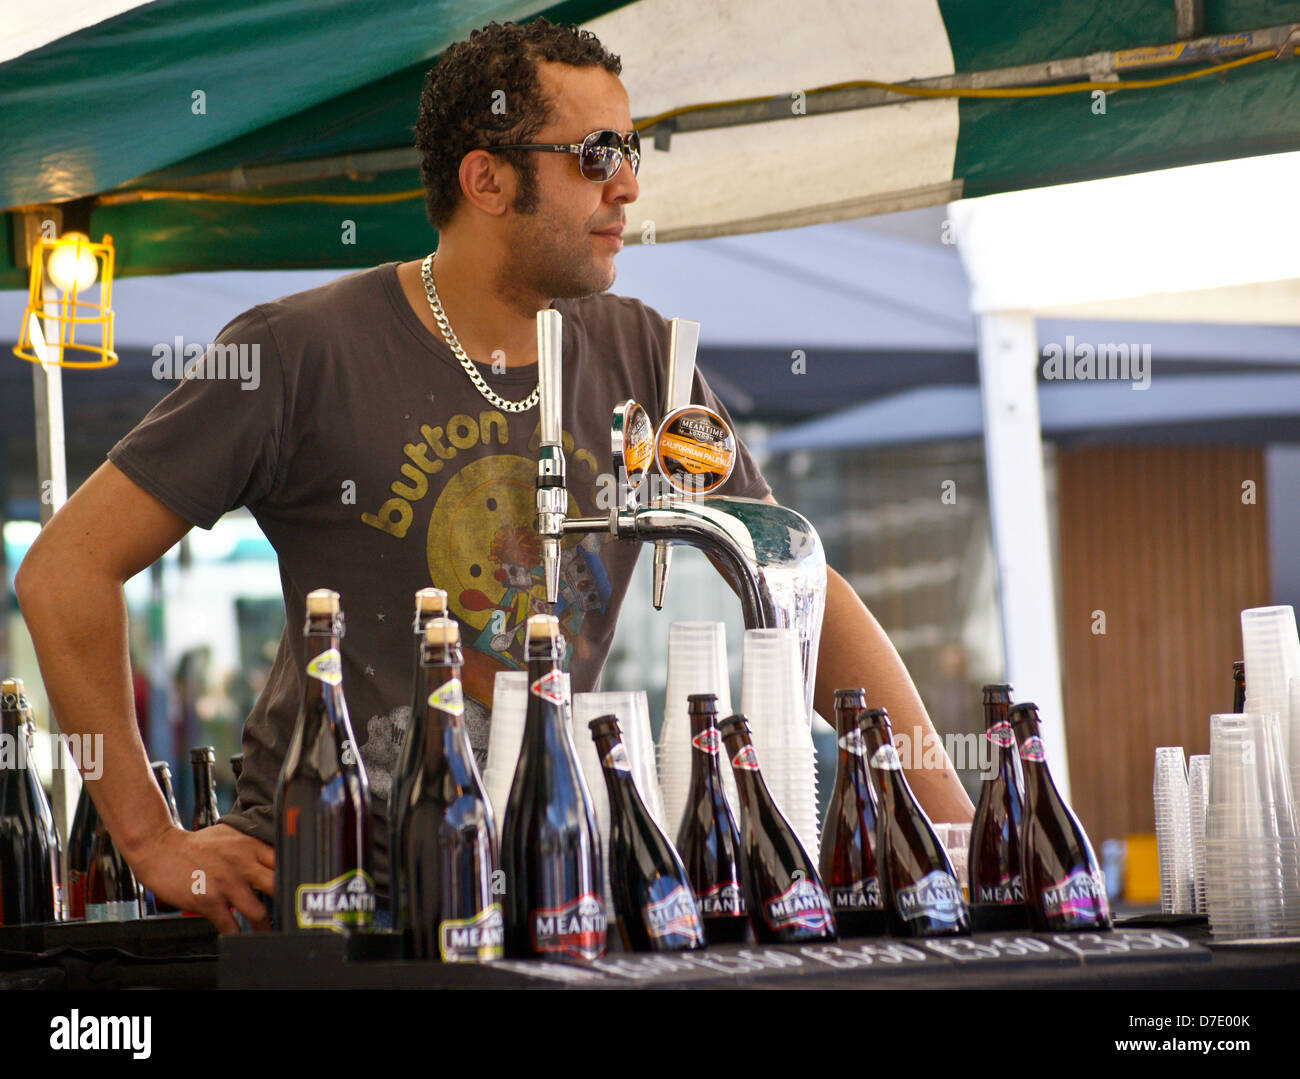 A barman pouring real ale from beer taps from Greenwich Meantime brewery stand, South Bank, London, England Stock Photo